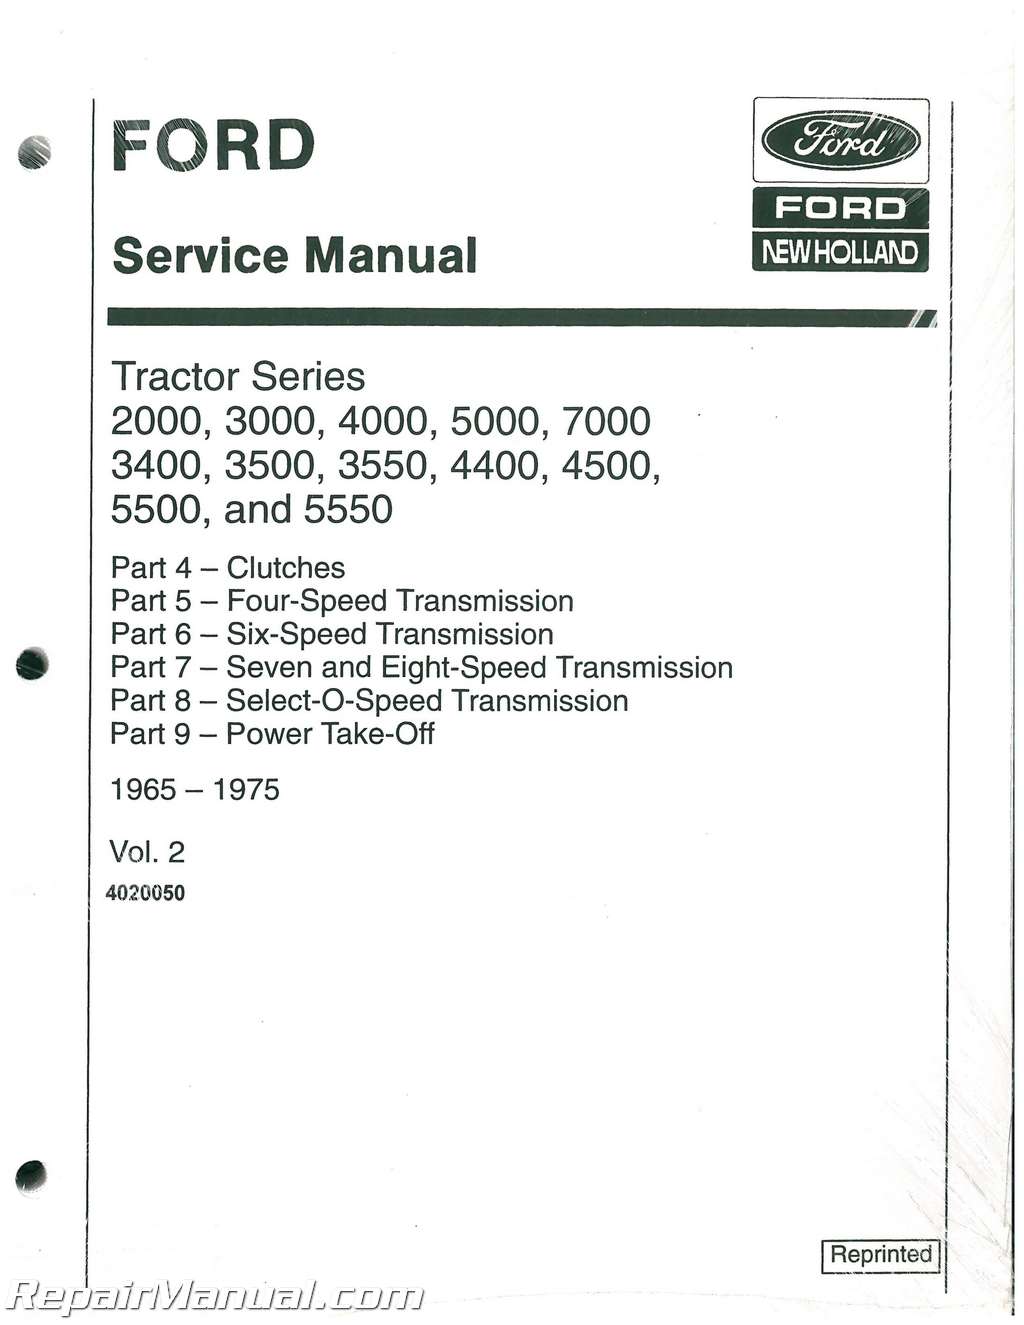 Manual stereo fic md 4500 ford